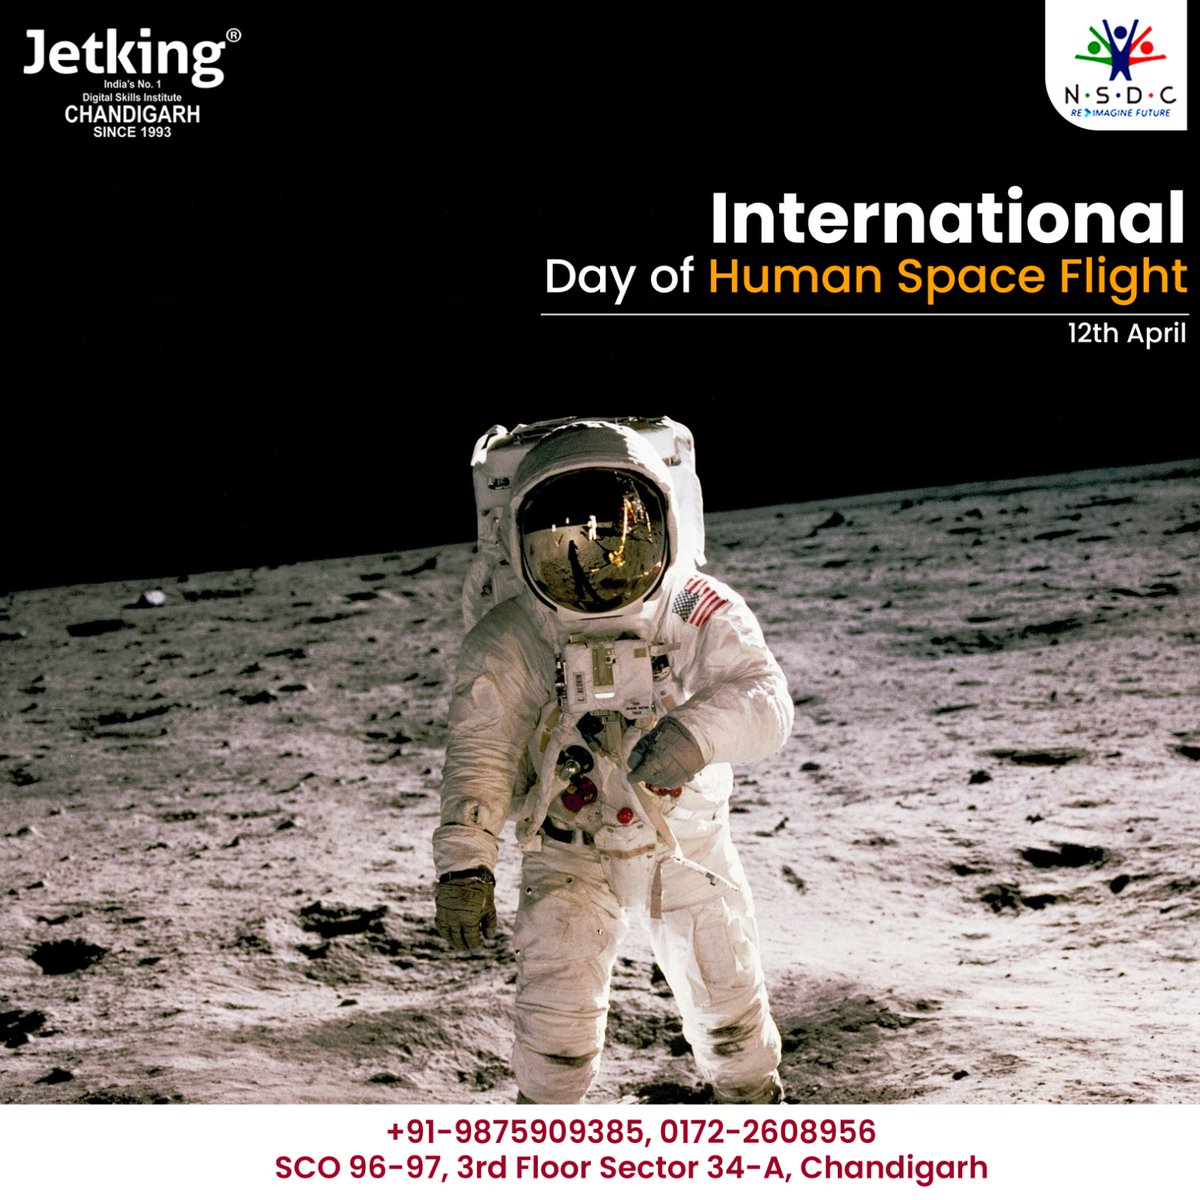 May the spirit of exploration continue to propel us to new frontiers, uniting us all in the vast expanse of space. Happy International Day of Human Space Flight! 🚀✨ #JetkingChandigarh #HumanSpaceFlight #CloudComputing #CyberSecurity #ItCourse #Ccna #ComputerCourses  #Chandigarh